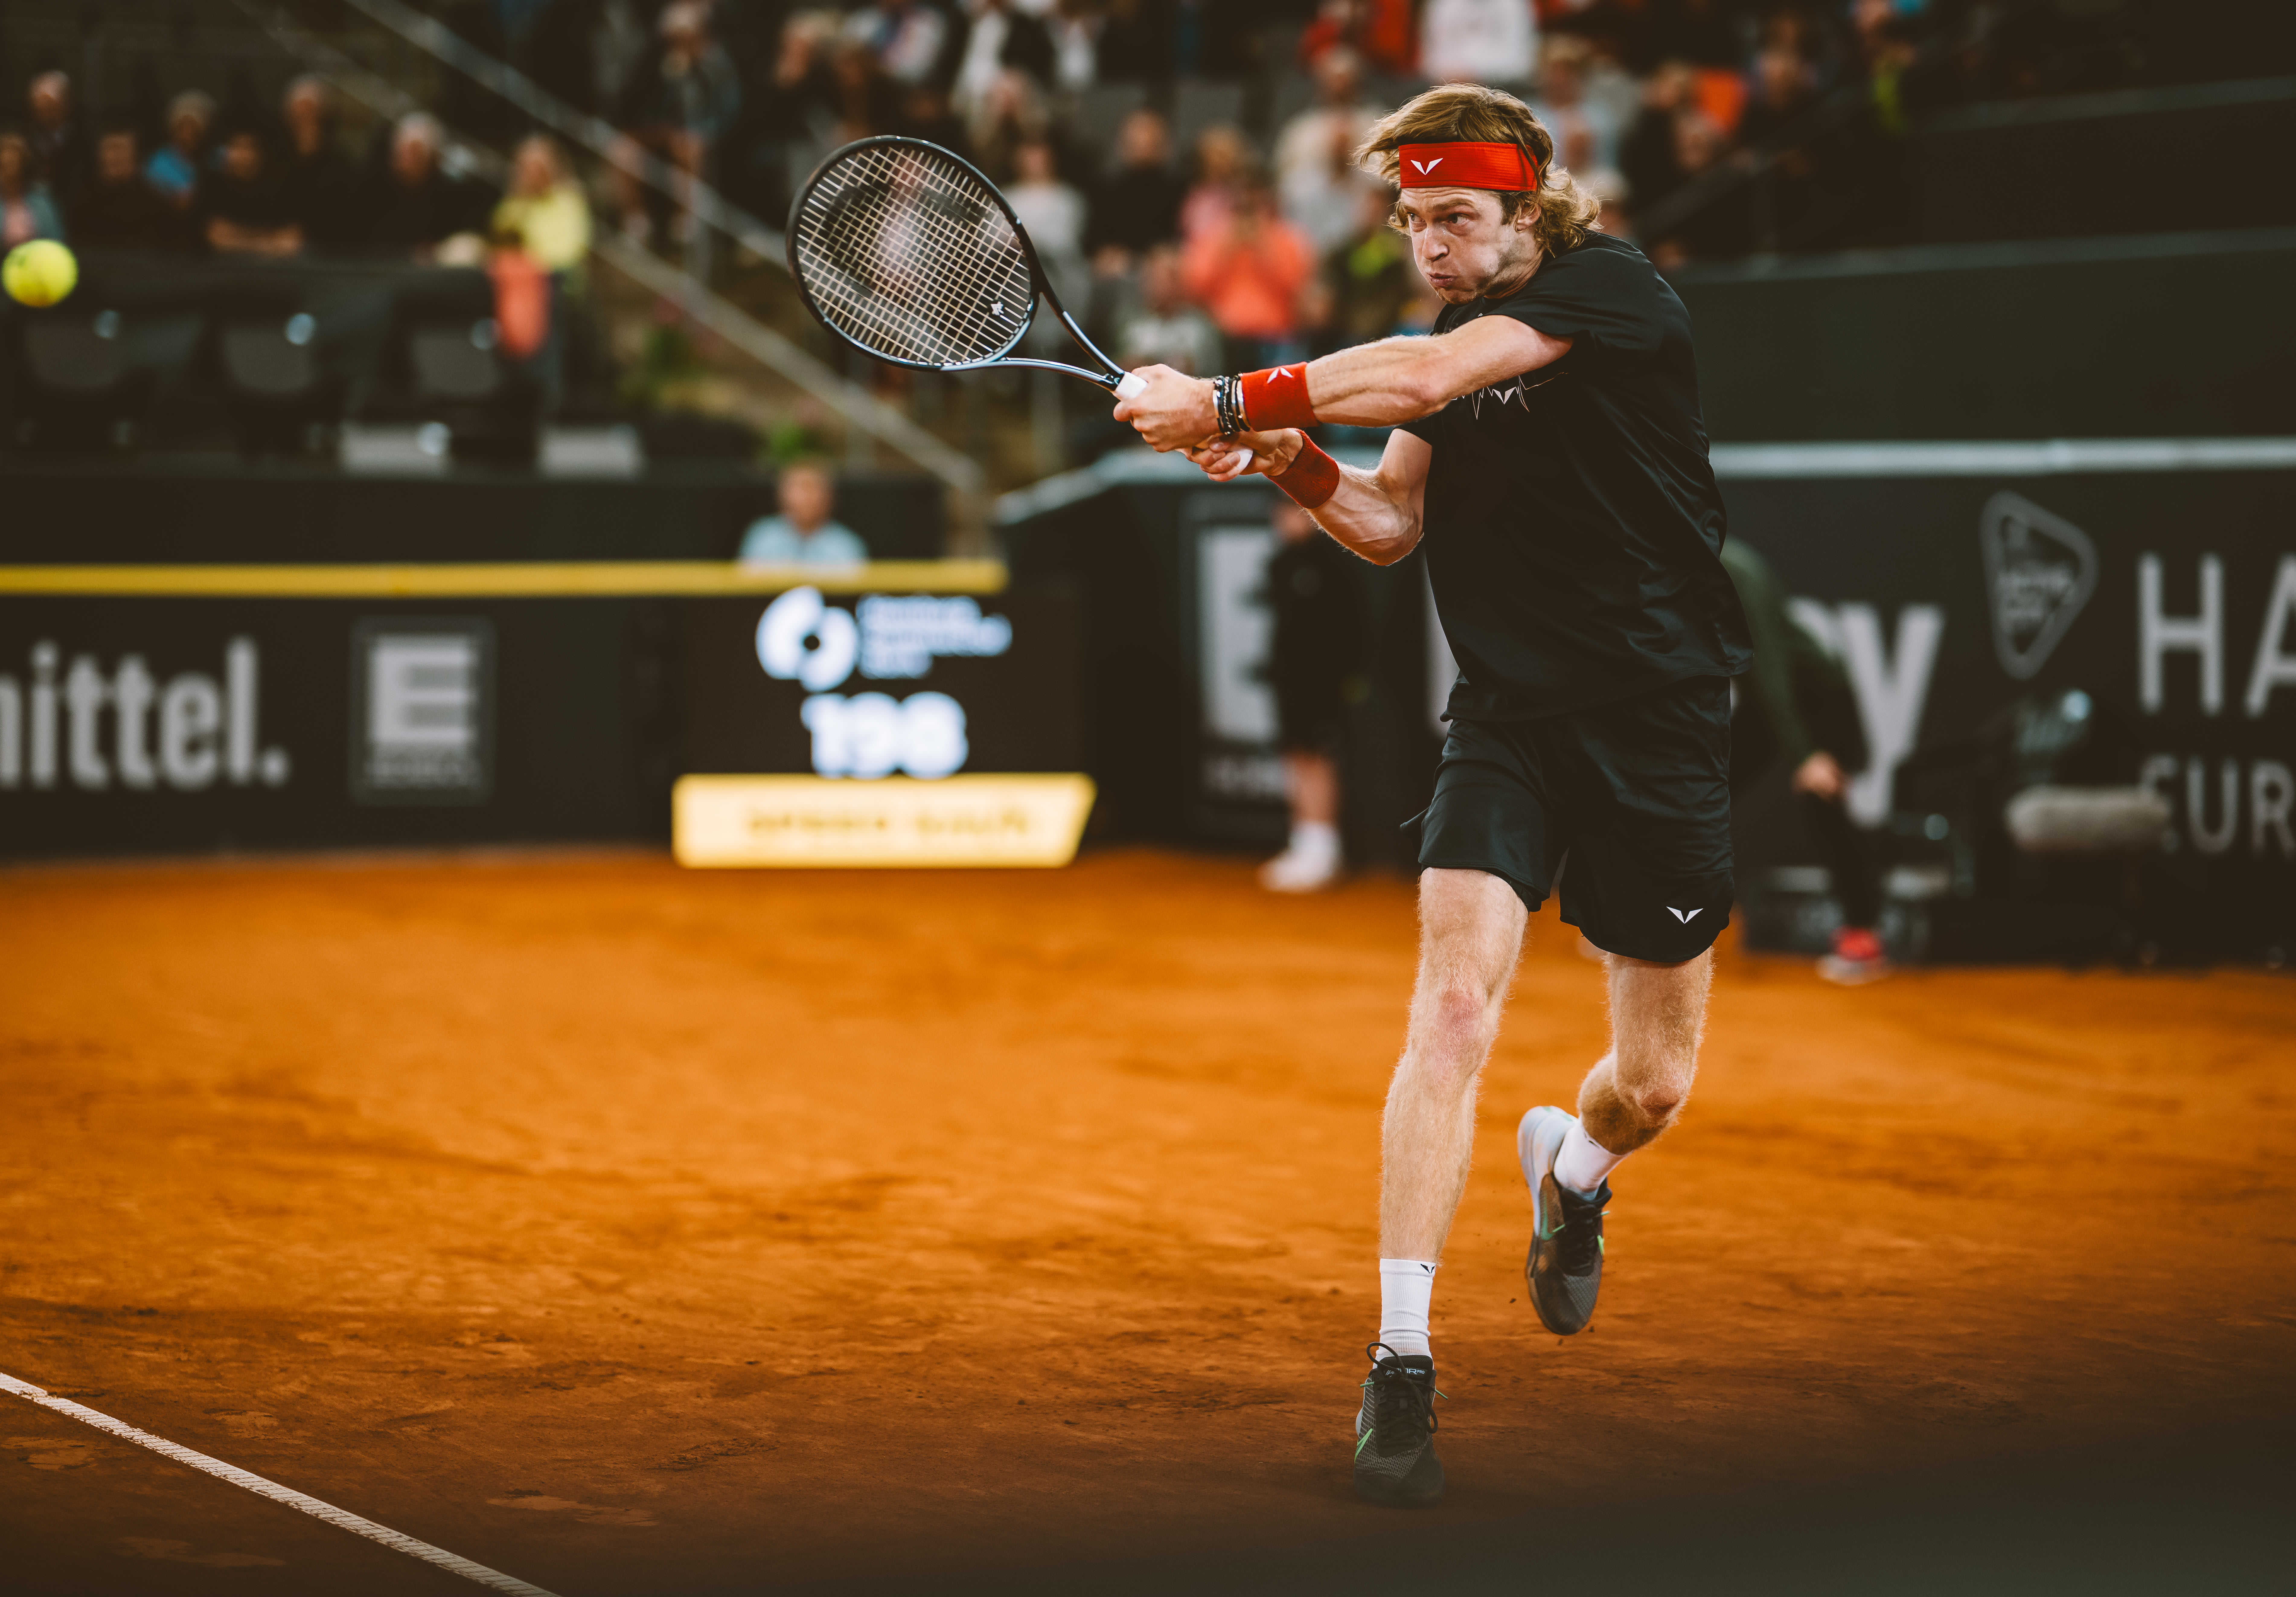 Andrey Rublev saves 3 match points before advancing at Hamburg European Open